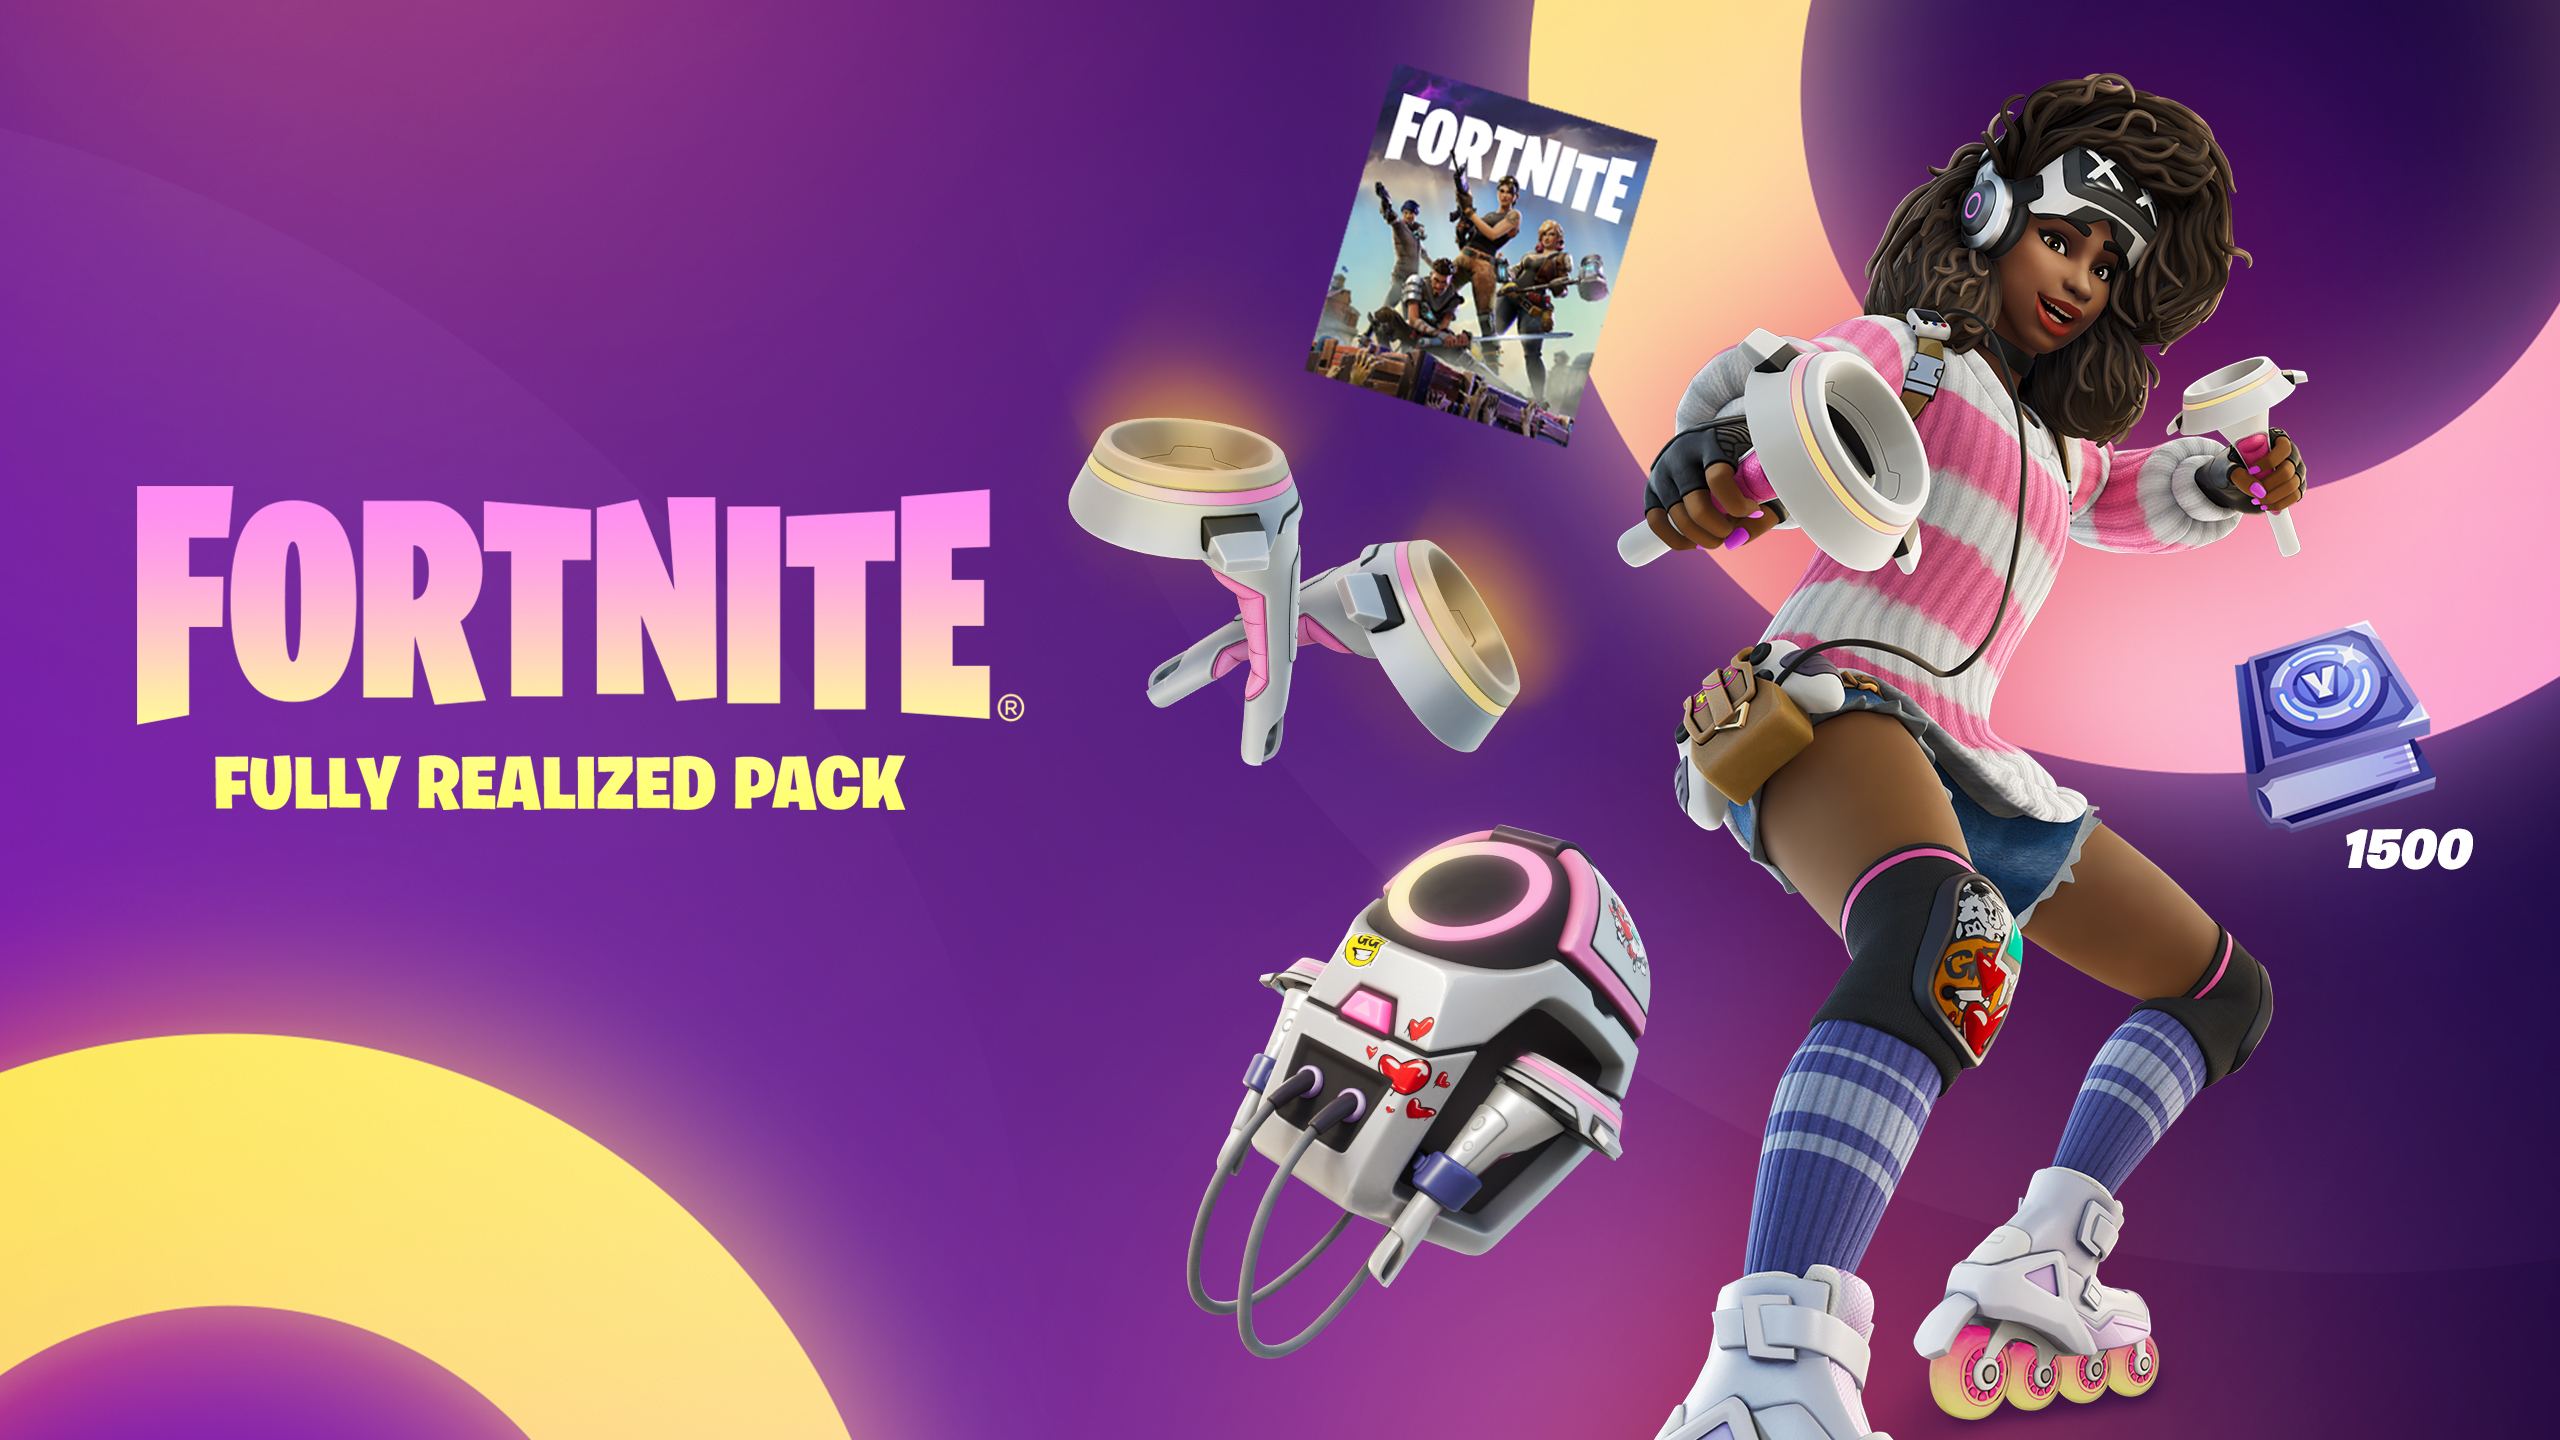 Introducing the Fortnite Battle Royale Collection - Missing Sleep